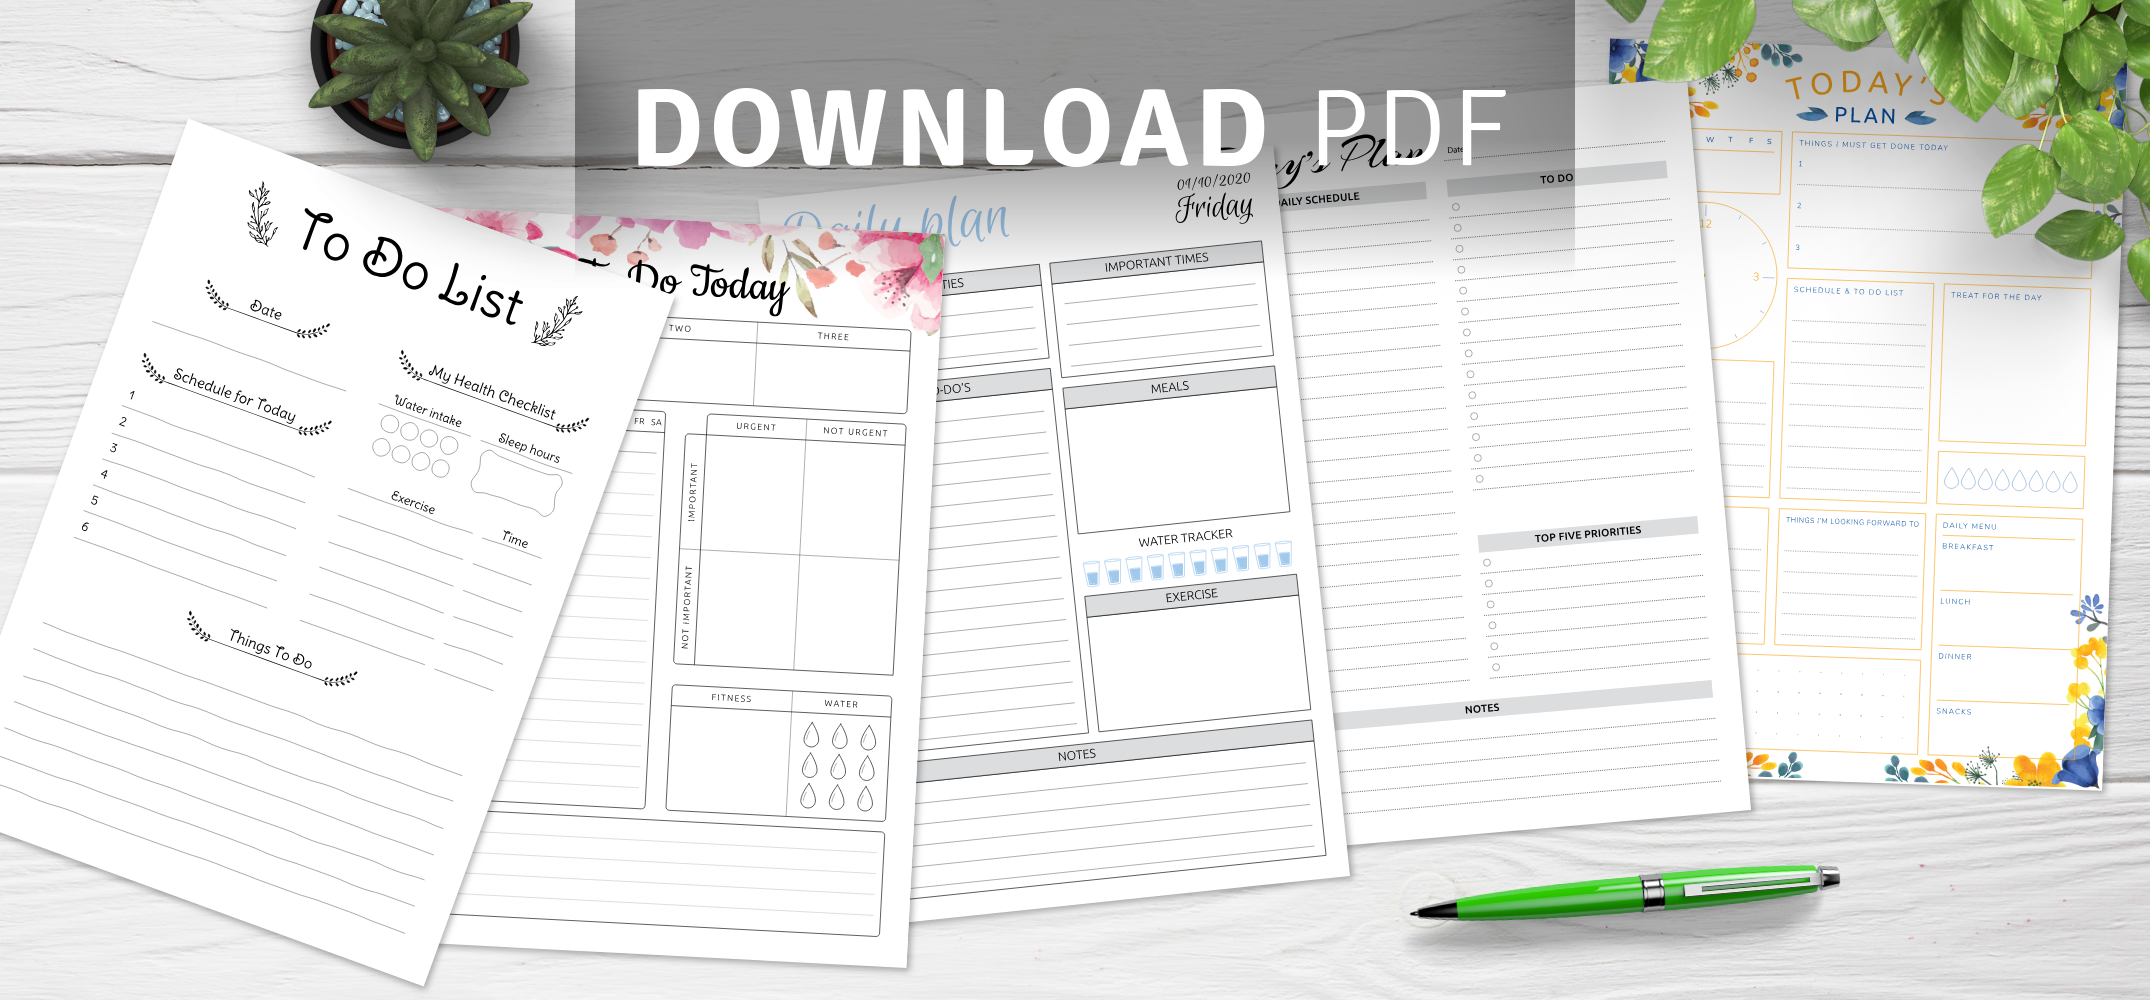 daily-task-list-templates-download-pdf